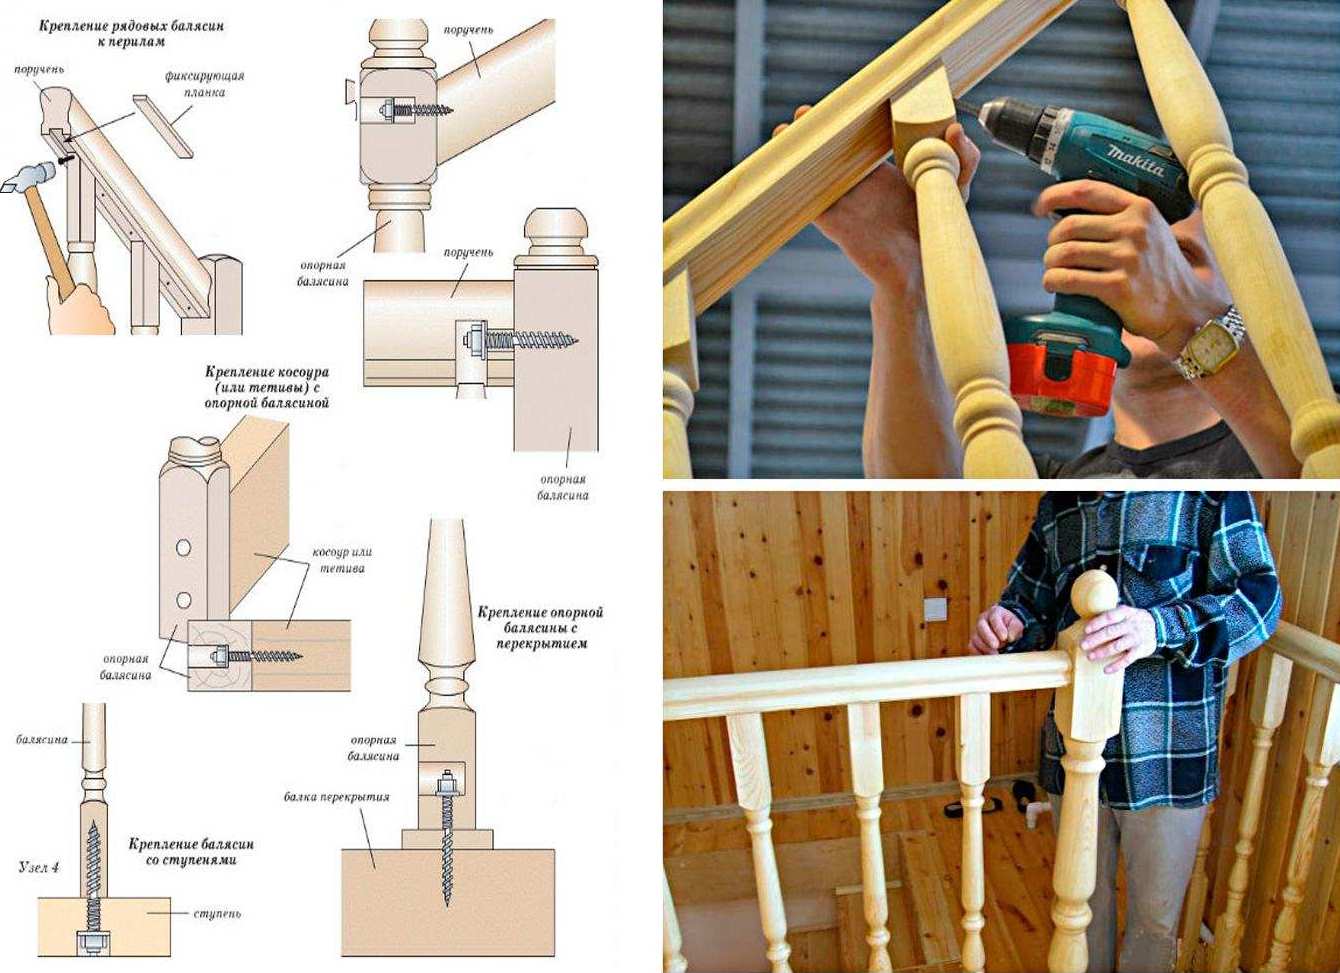 Layout of fastening points for wooden stairs